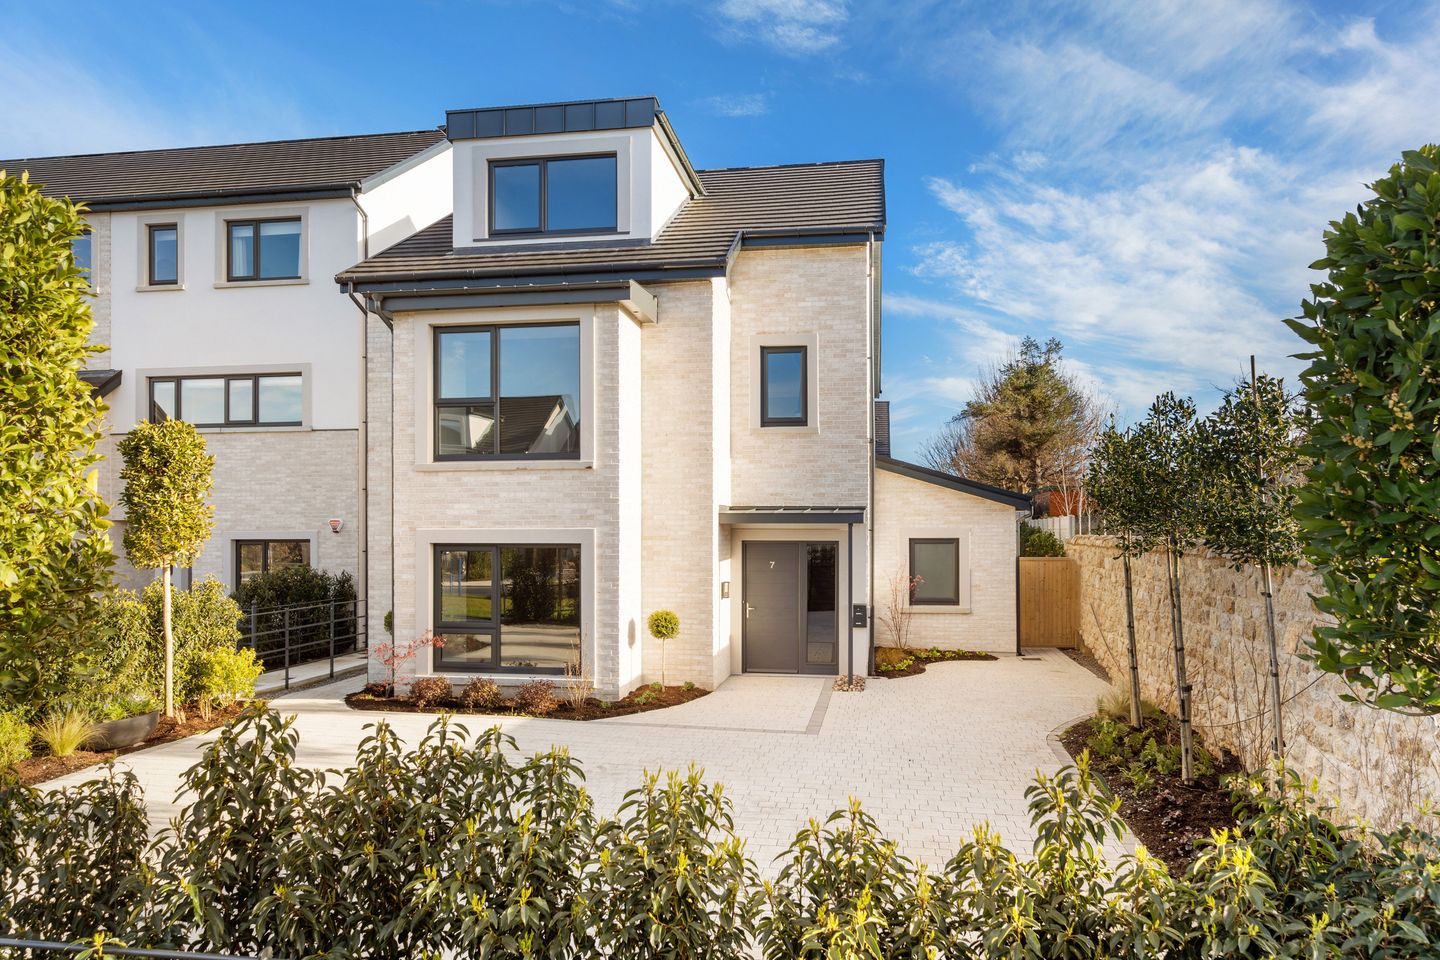 4 Bed Detached, Fairfield, Fairfield , New Road, Greystones, Co. Wicklow